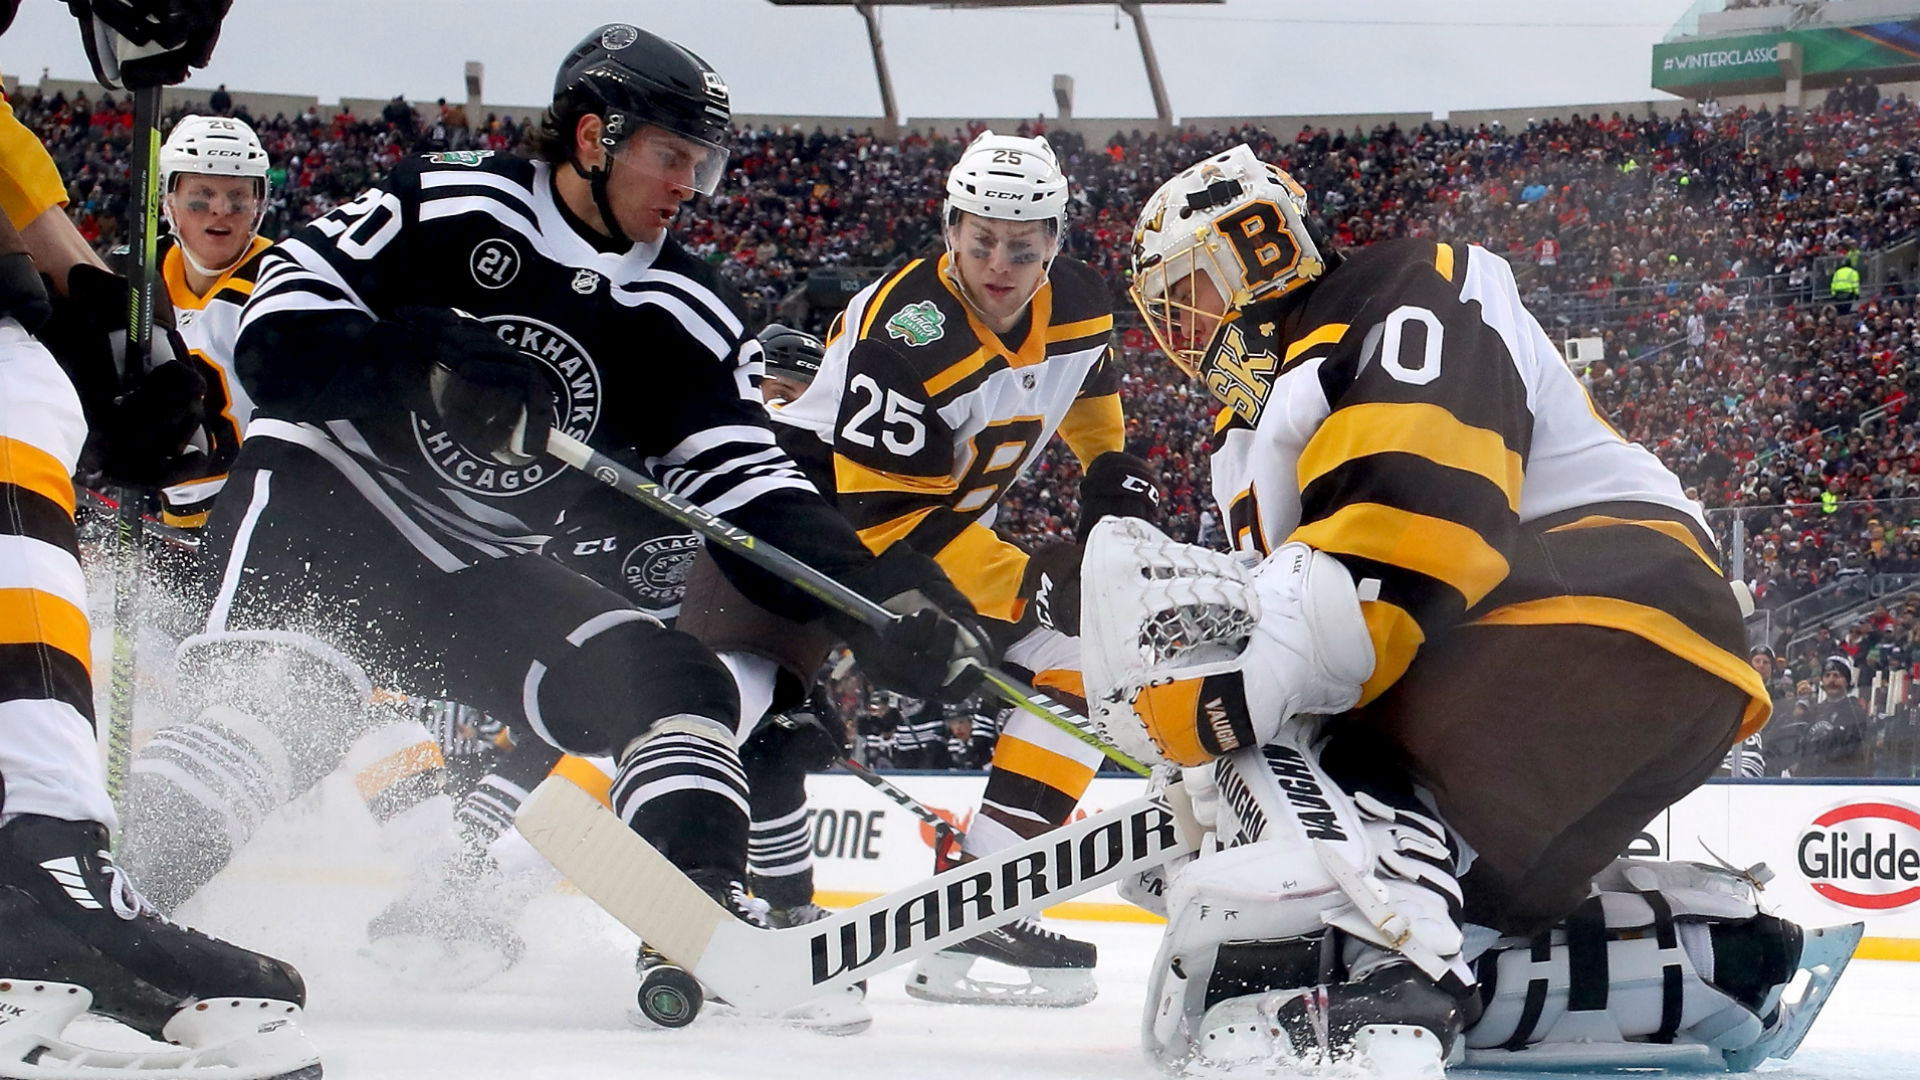 NHL Winter Classic 2019 results Score, highlights from Bruins' win